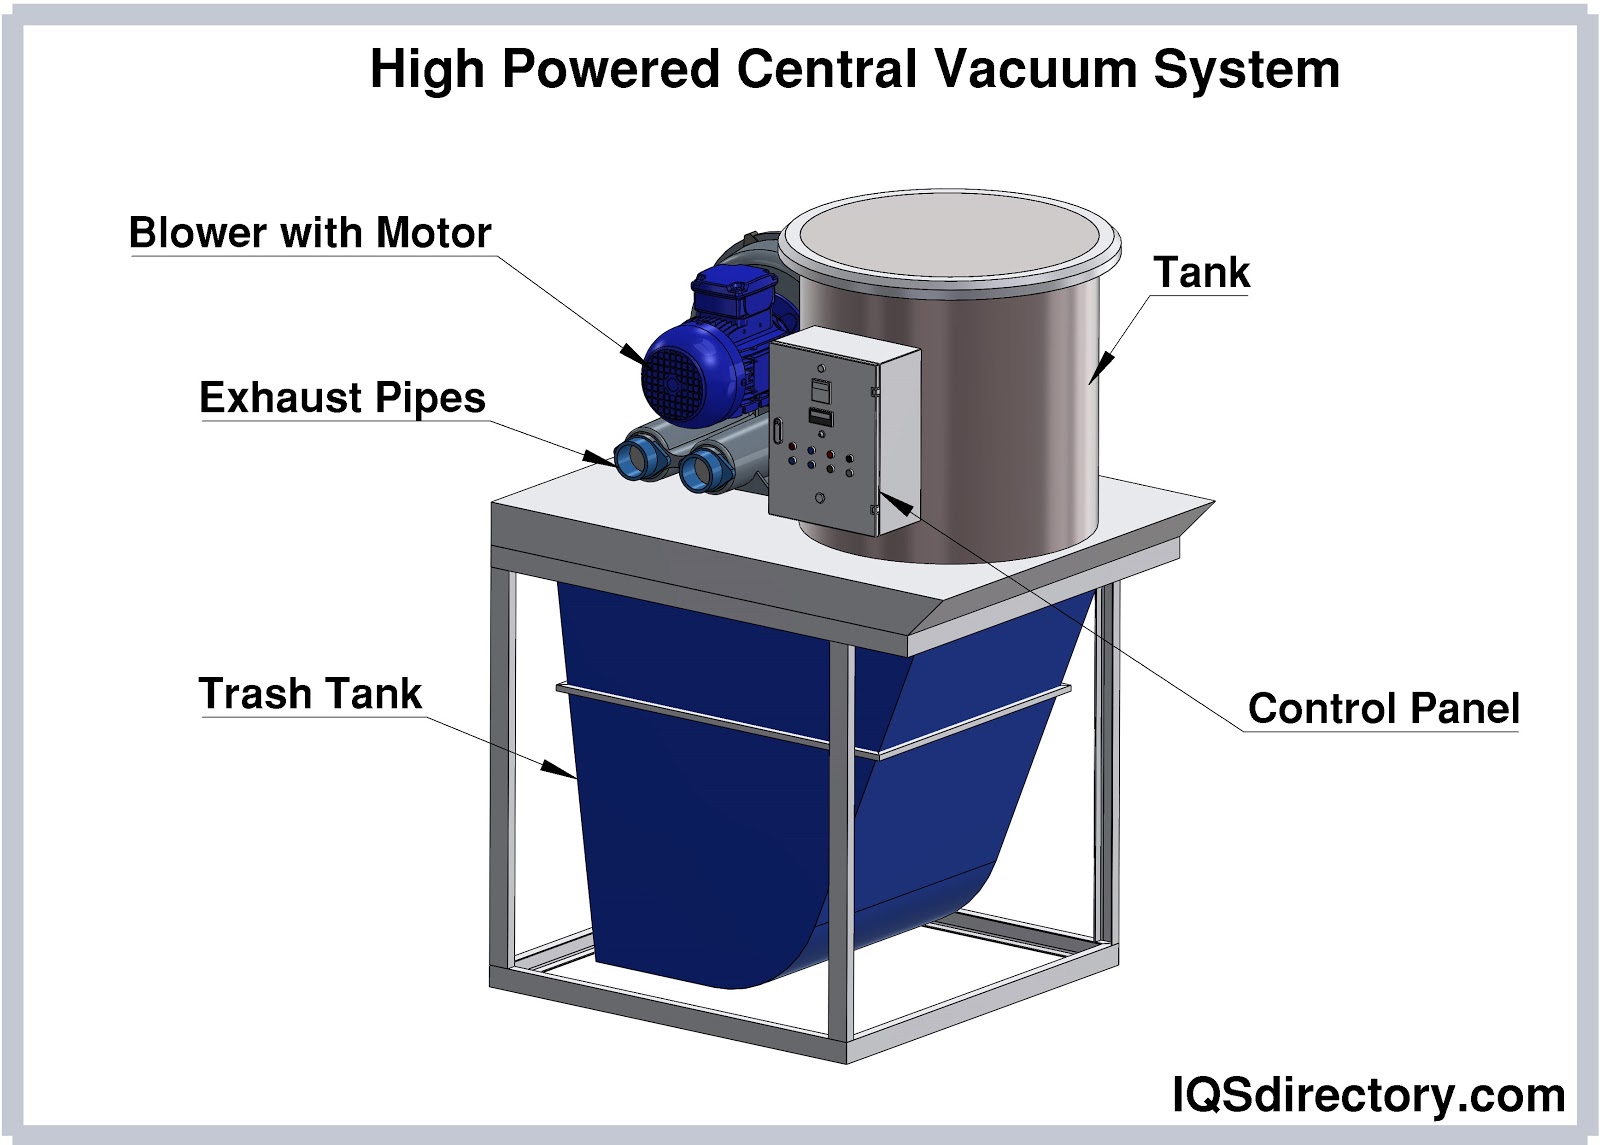 High Powered Central Vacuum System